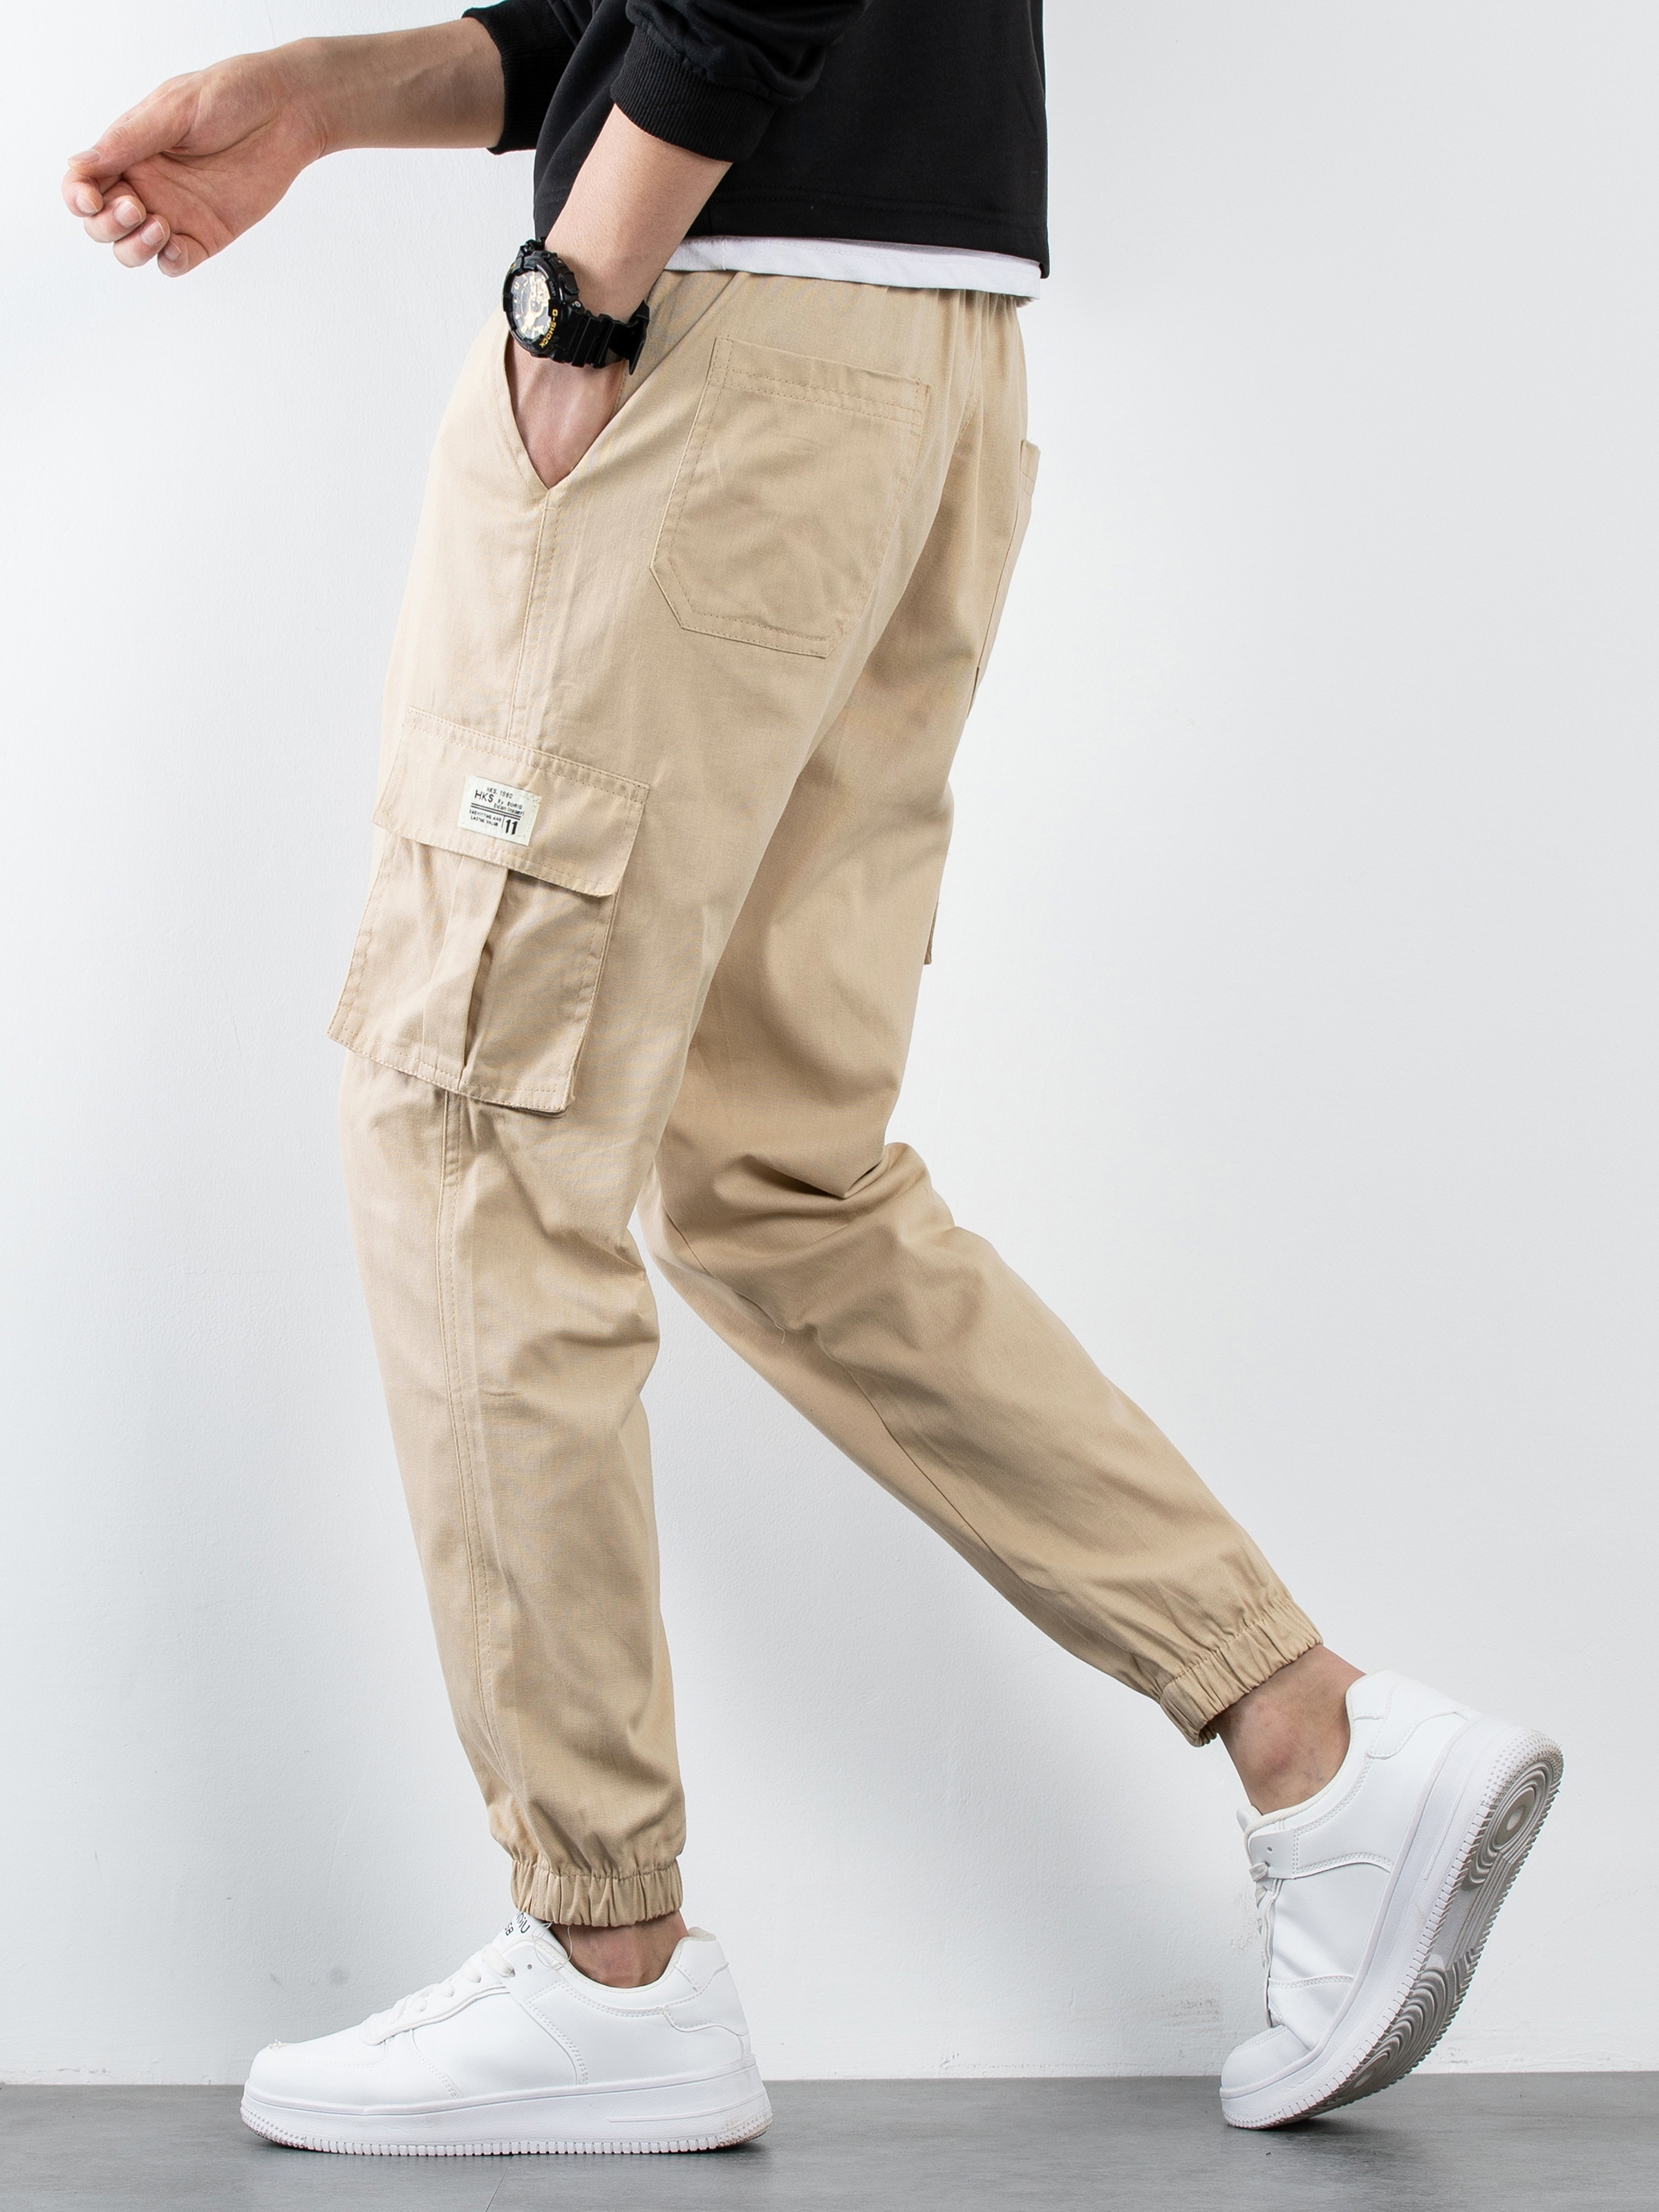 Men's Multi-pocket Cargo Pants, Outdoor Casual Trousers